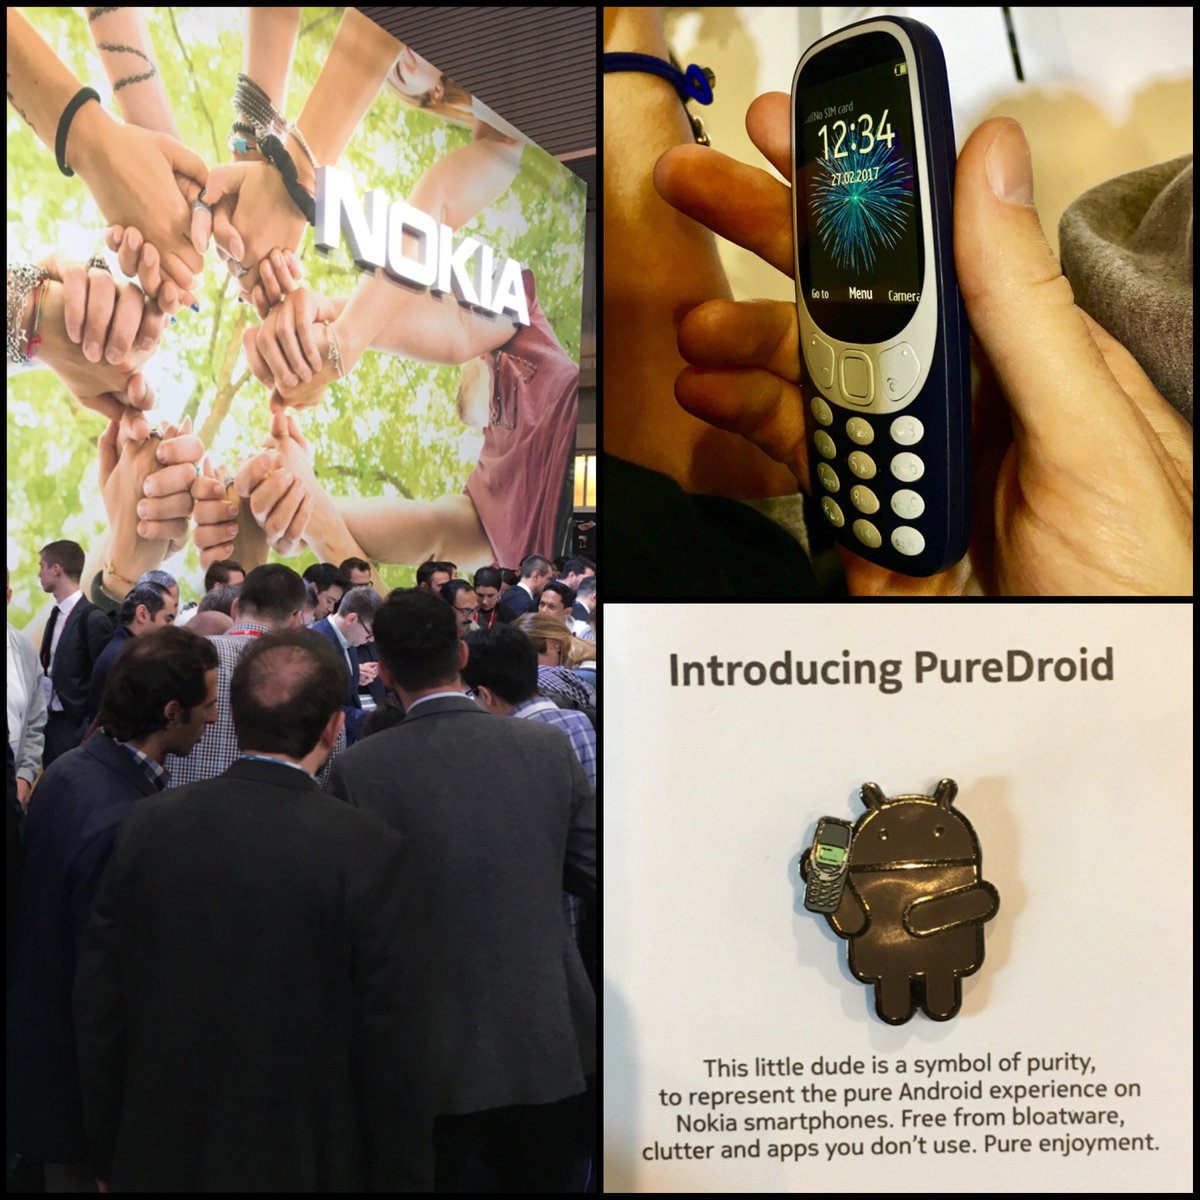 🤳 With #MWC18 around the corner, I was curious to see how #Nokia3310 launched at #MWC17 w/ much anticipation had done... Couldn't find sales #'s for this line only, but @HMDGlobal sold nearly 6⃣0⃣m (!) @Nokia feature phones in their 1st year: Not bad!
> goo.gl/xTVFVR